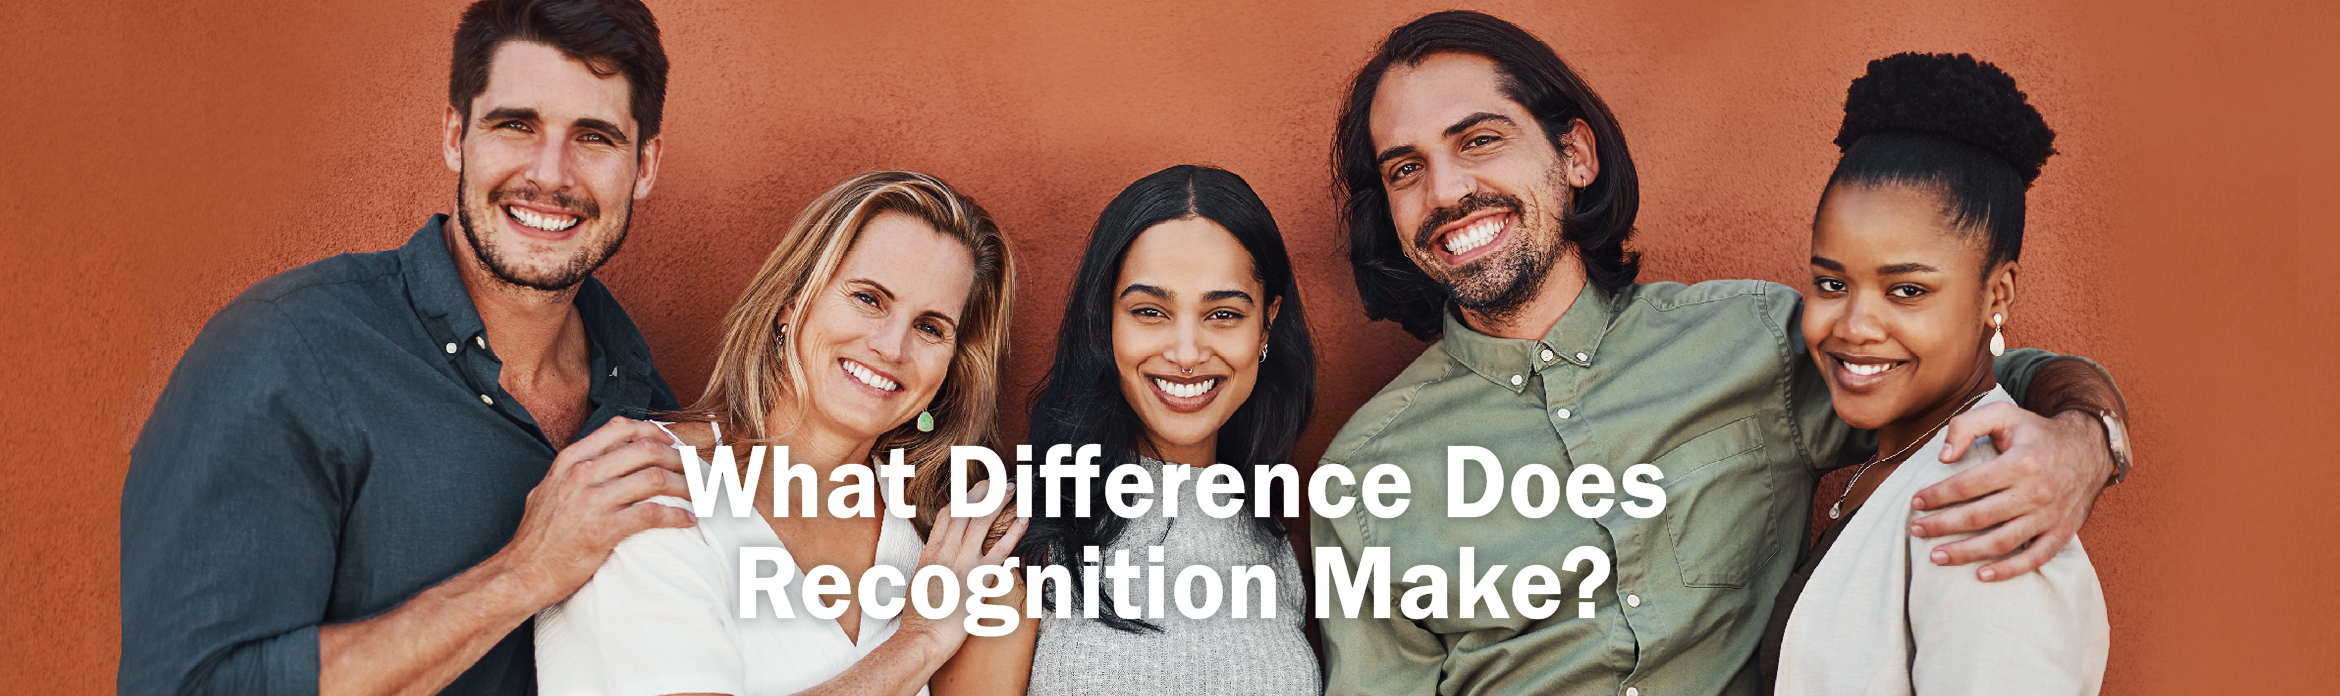 What Difference Does Recognition Make?